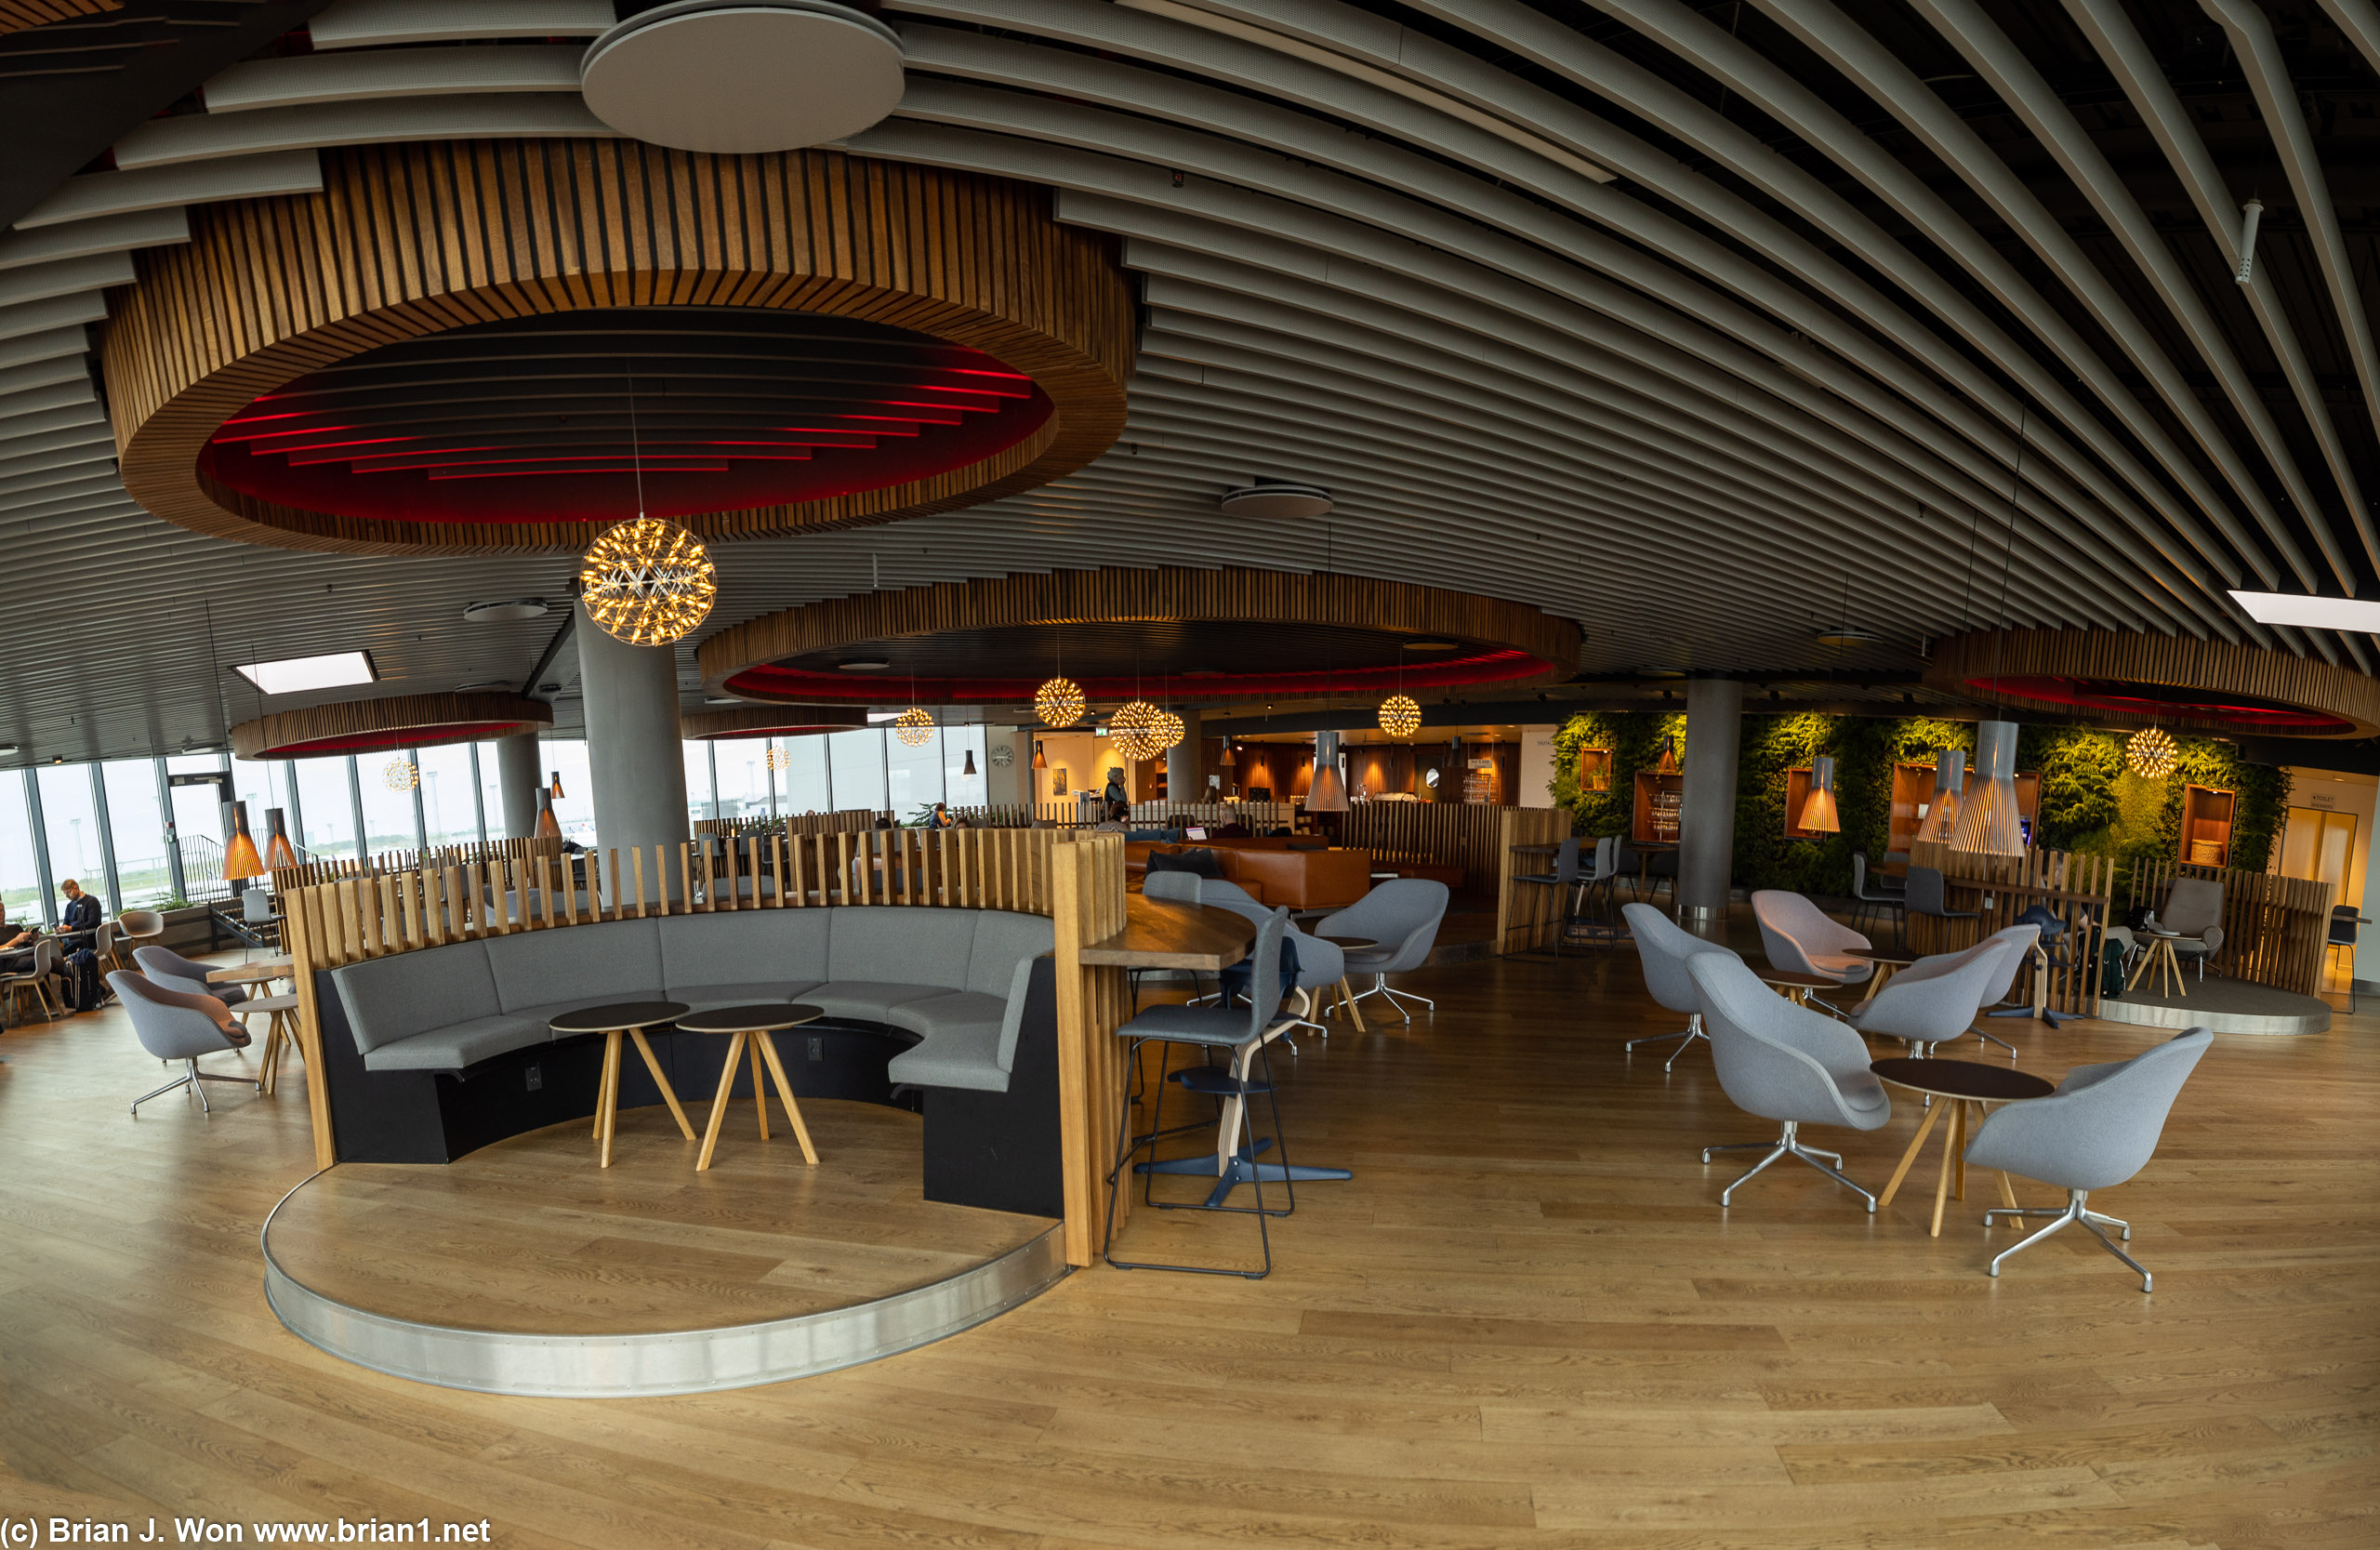 Eventyr Lounge is one of the only non-Schengen gate options at CPH.